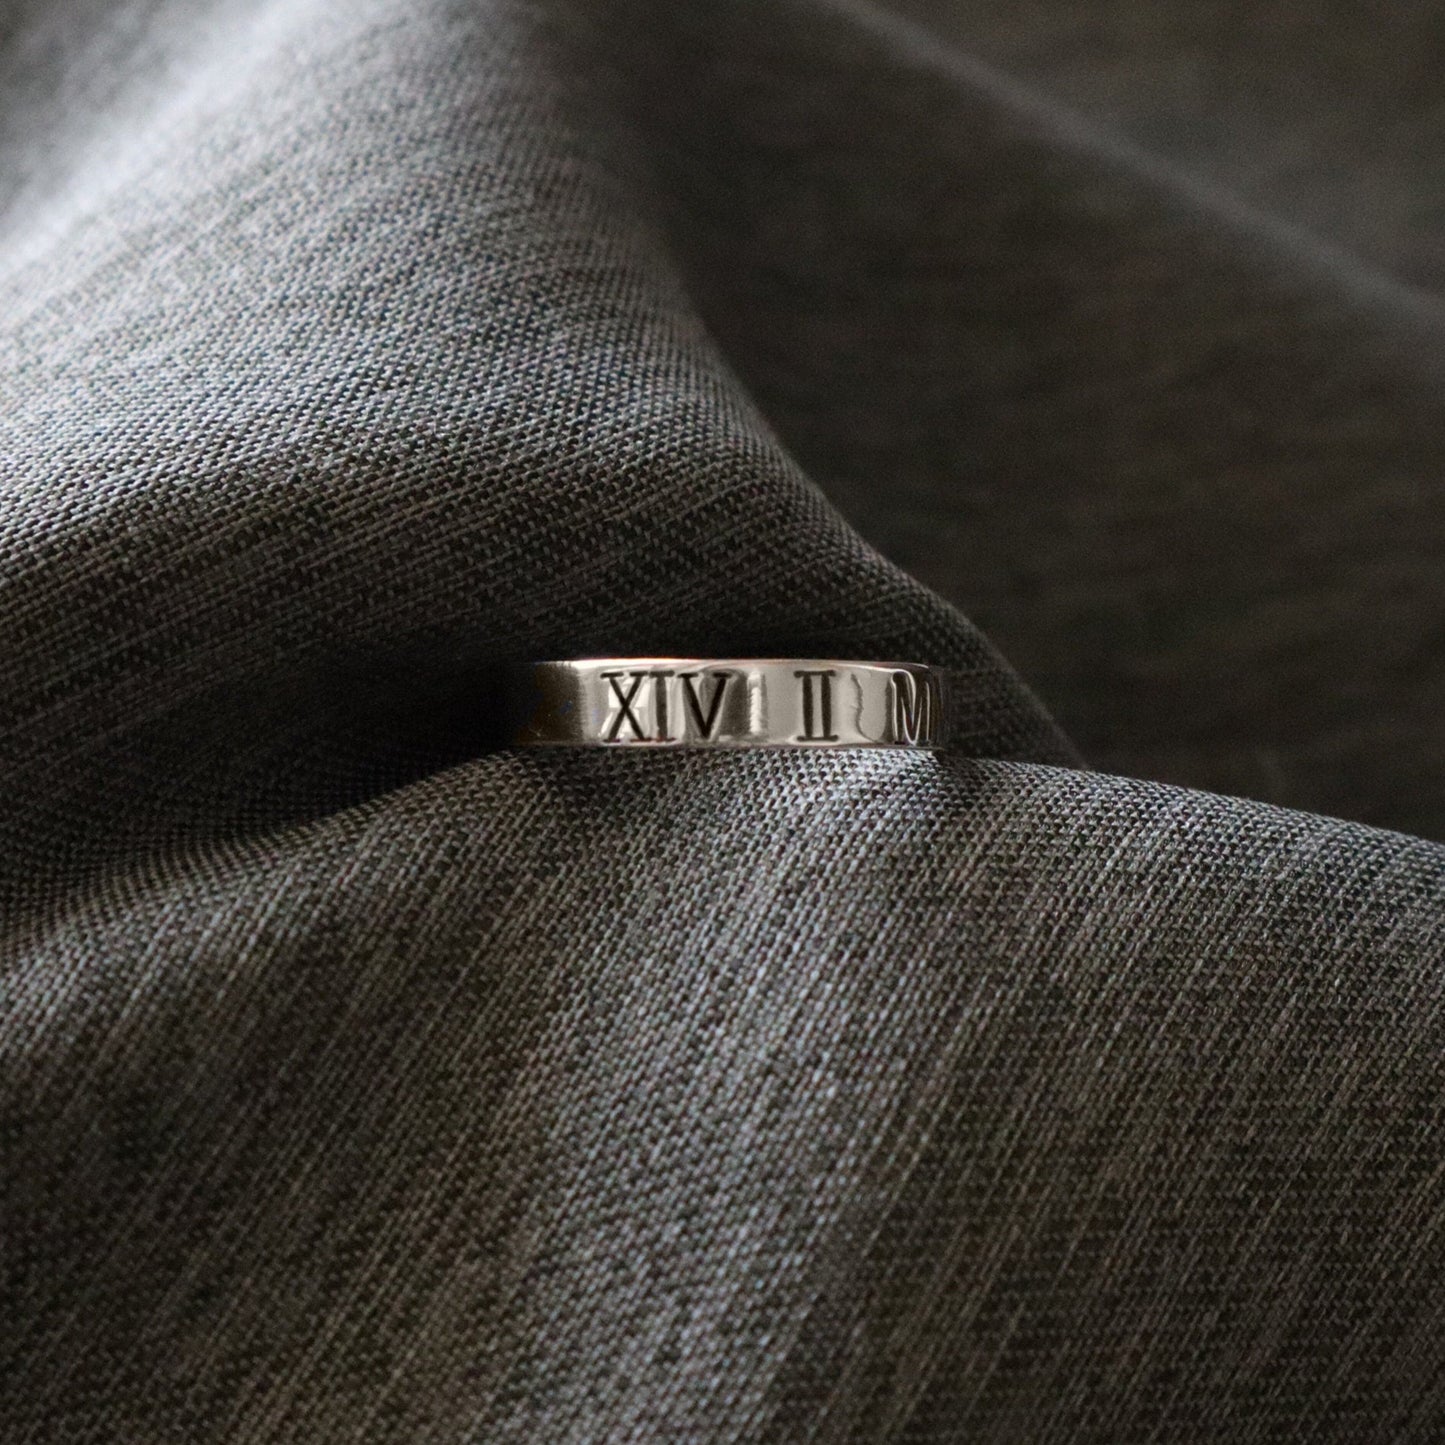 Roman Numeral Band Ring